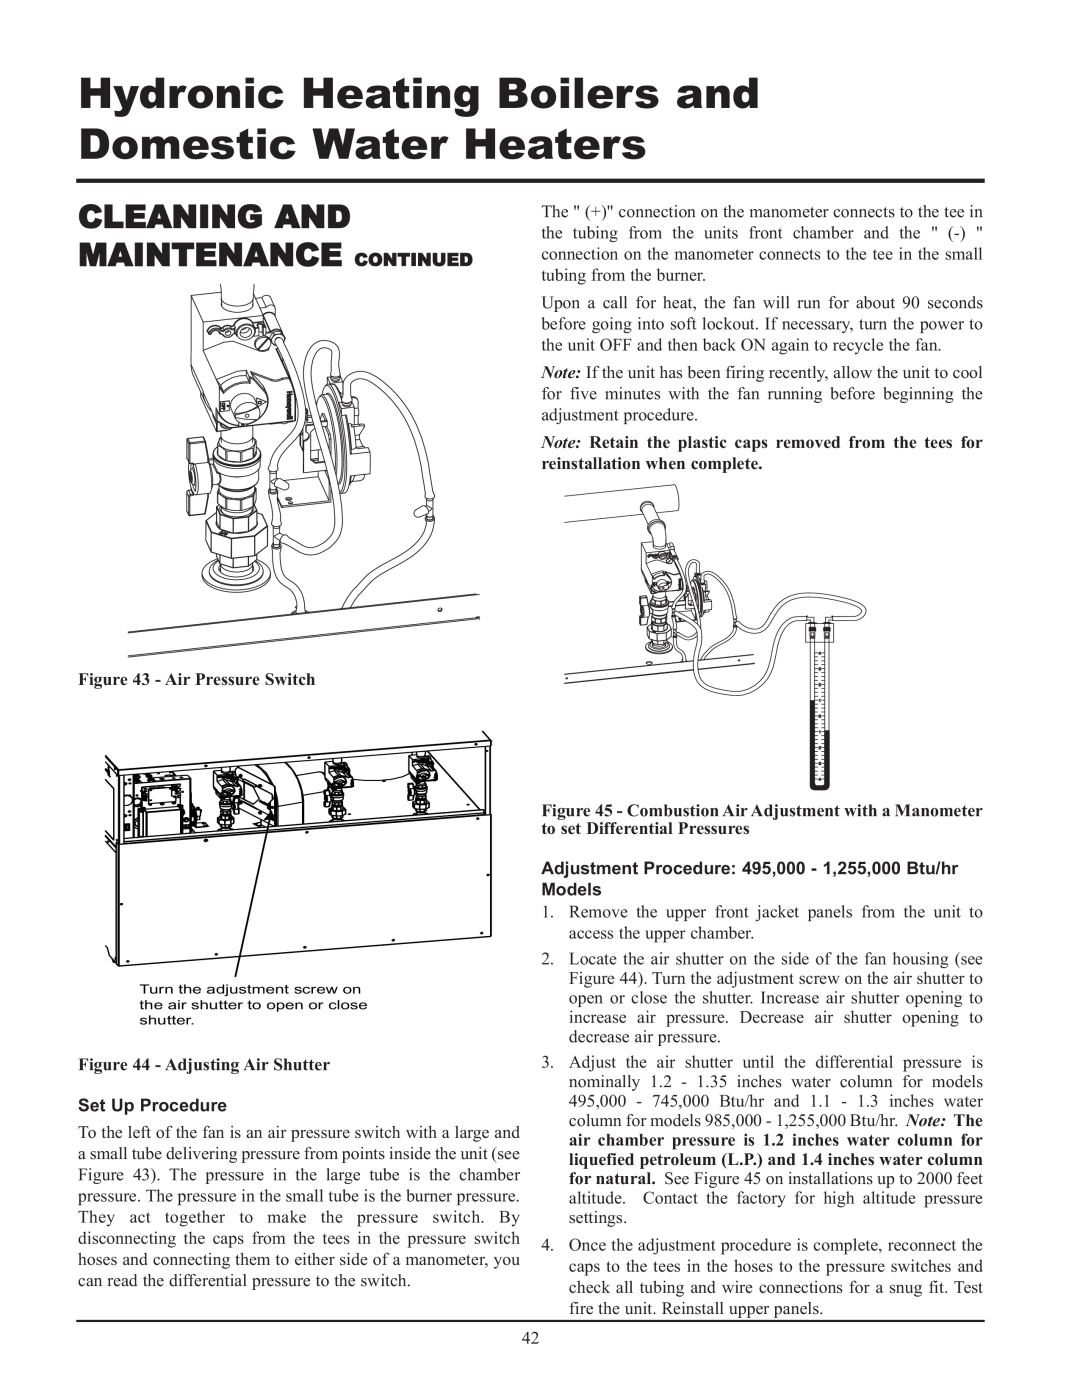 Lochinvar 495, 065, 000 - 2 service manual Cleaning And Maintenance Continued, Air Pressure Switch, Adjusting Air Shutter 